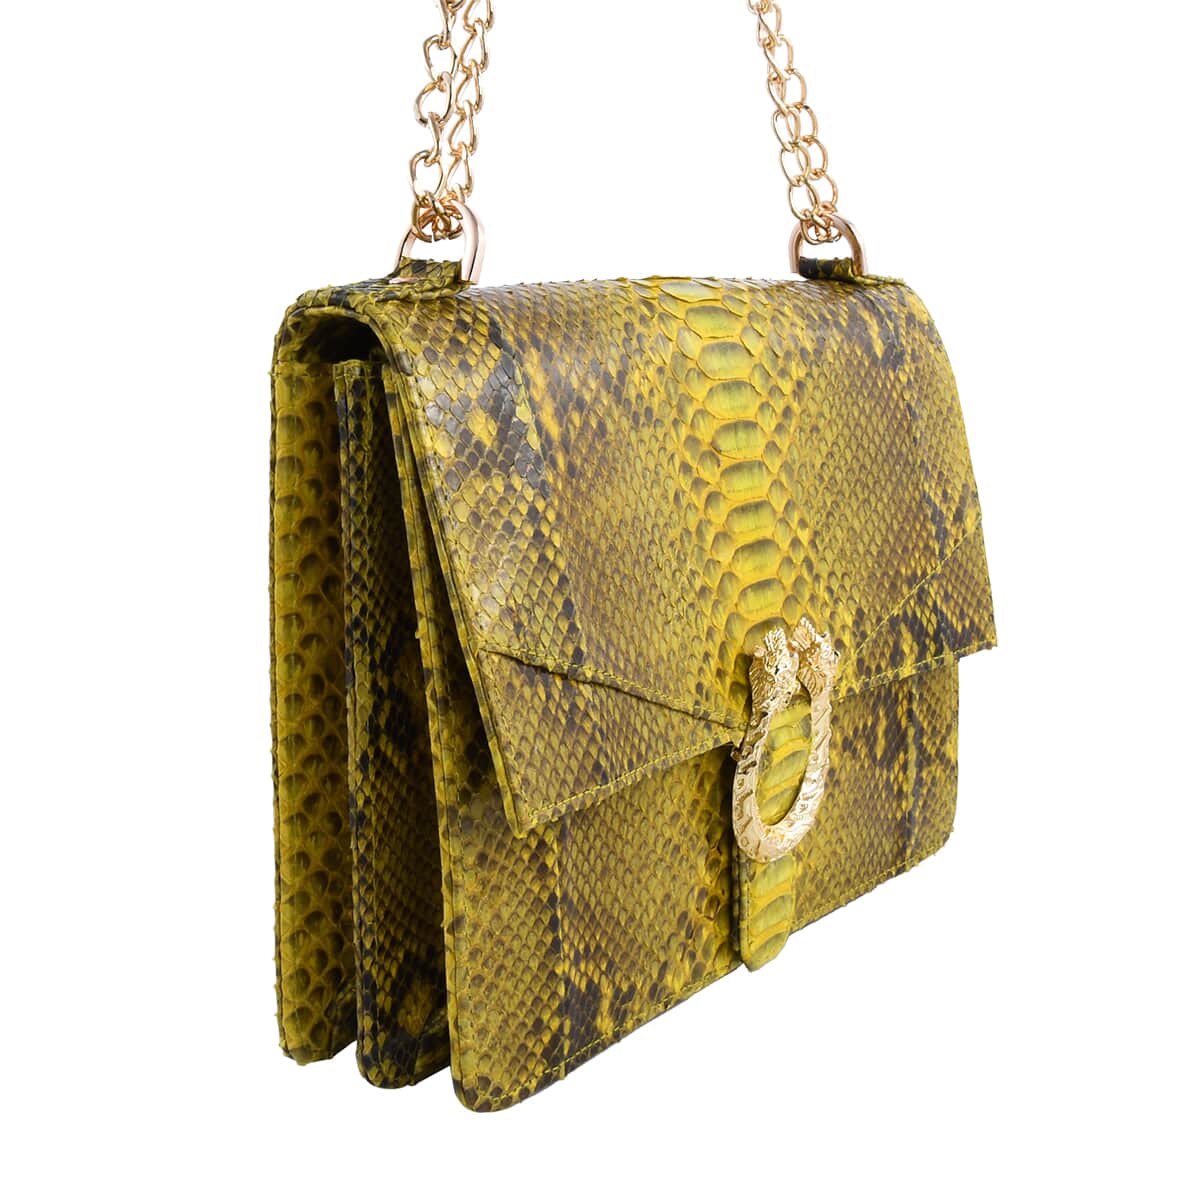 The Pelle Collection Handmade 100% Genuine Python Leather Golden & Yellow Crossbody Bag image number 2